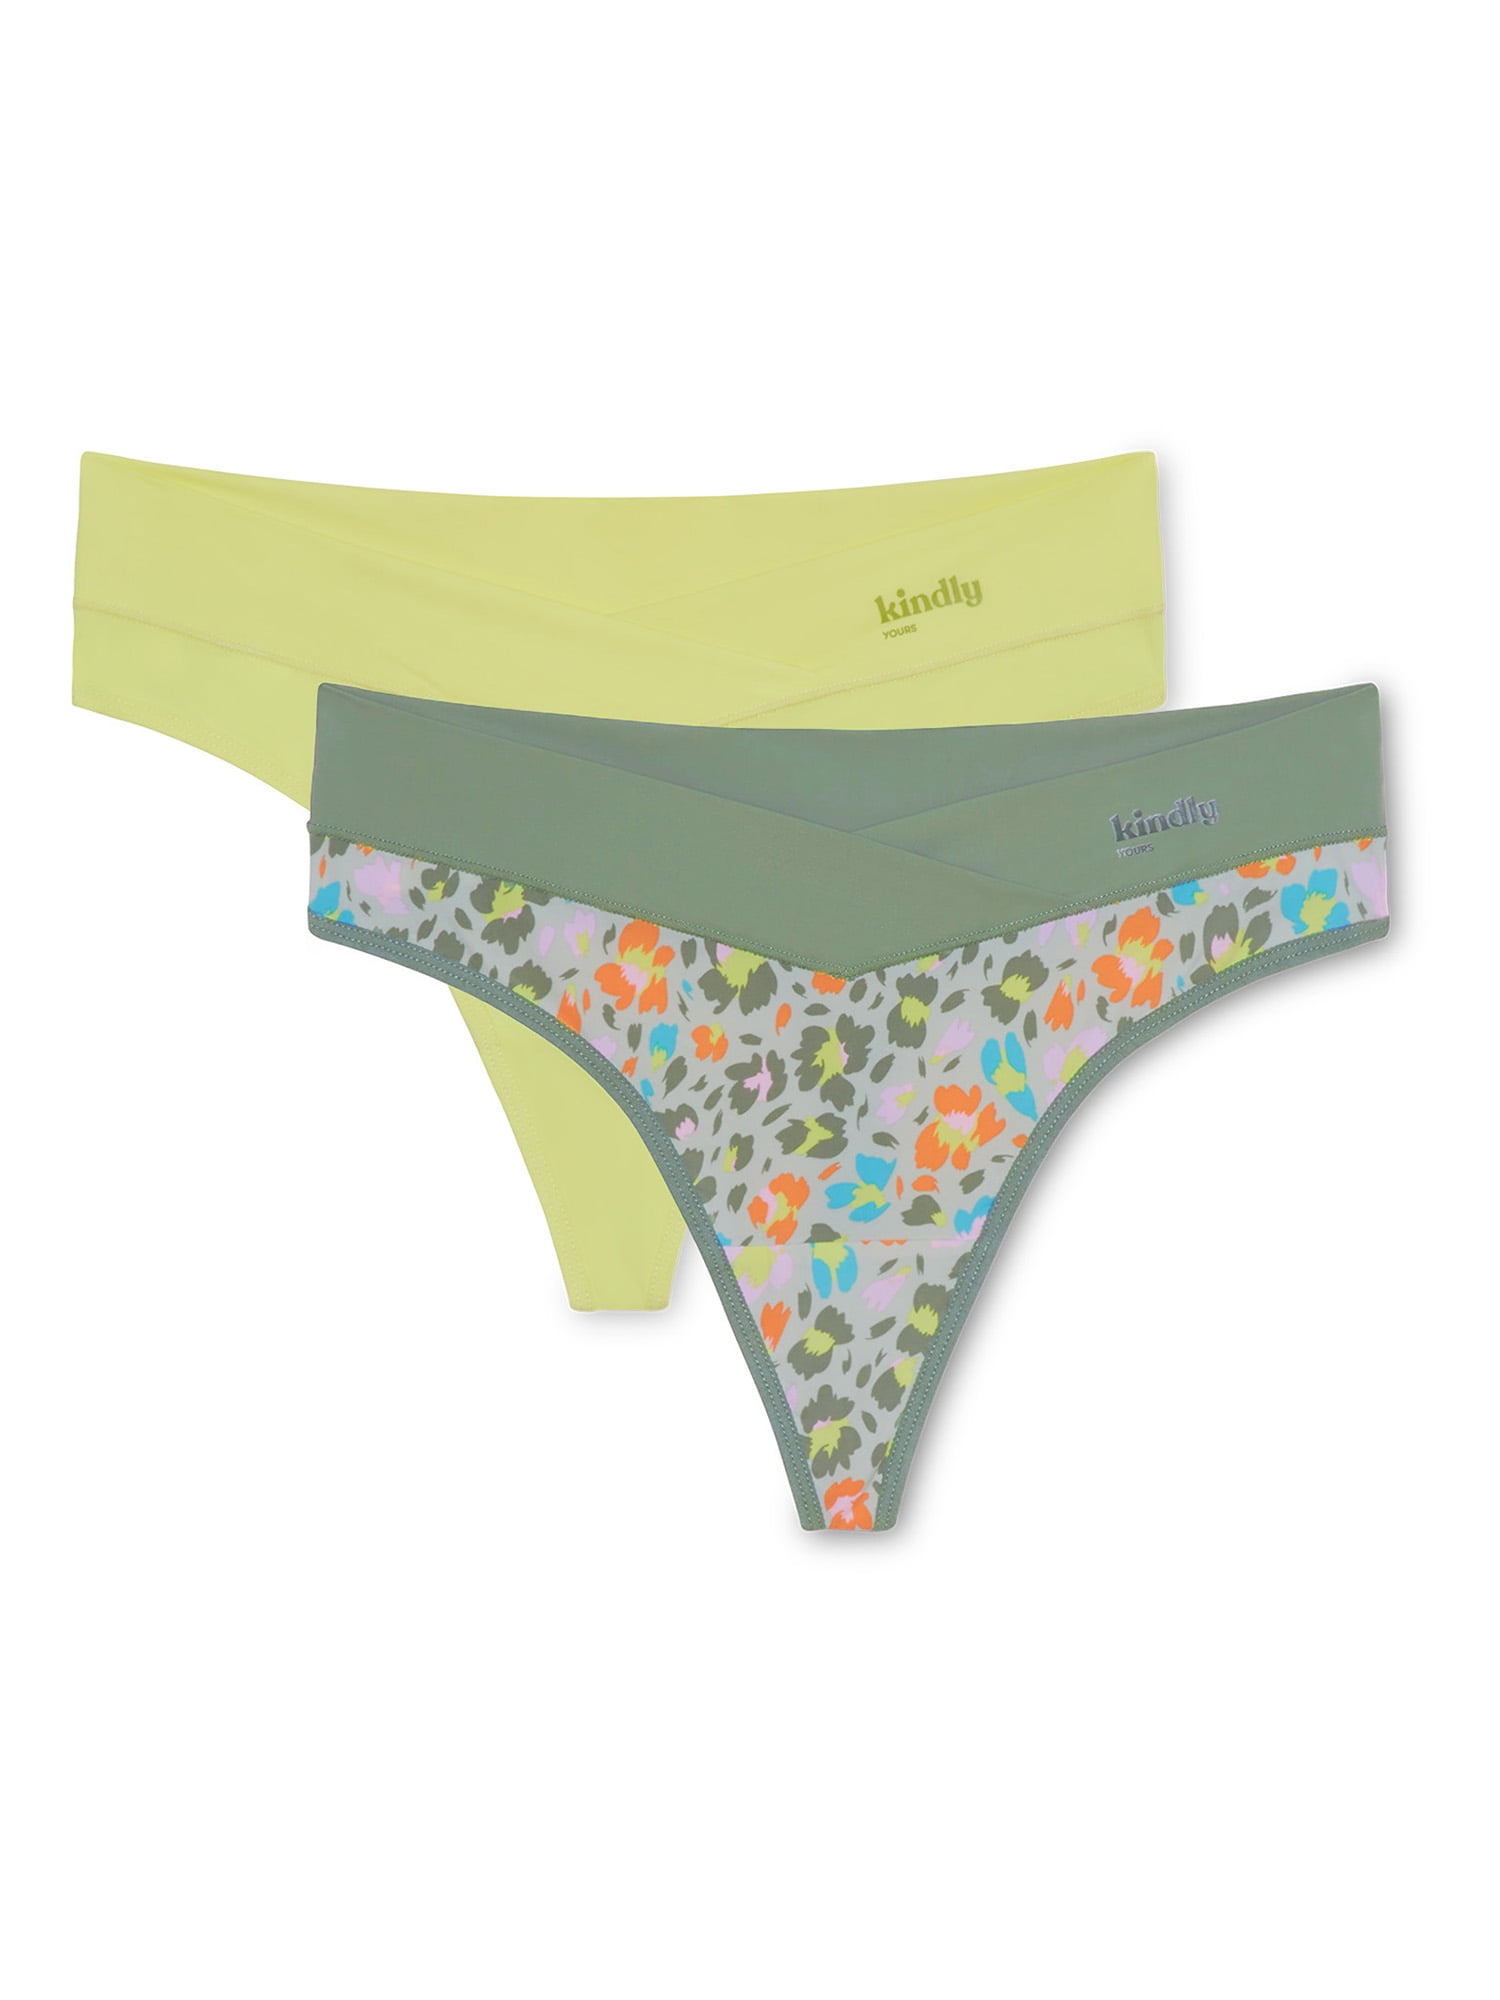 Kindly Yours Women's So Comfy Crossover Waist Thong Panties, 2-Pack, Sizes  XS to XXXL 